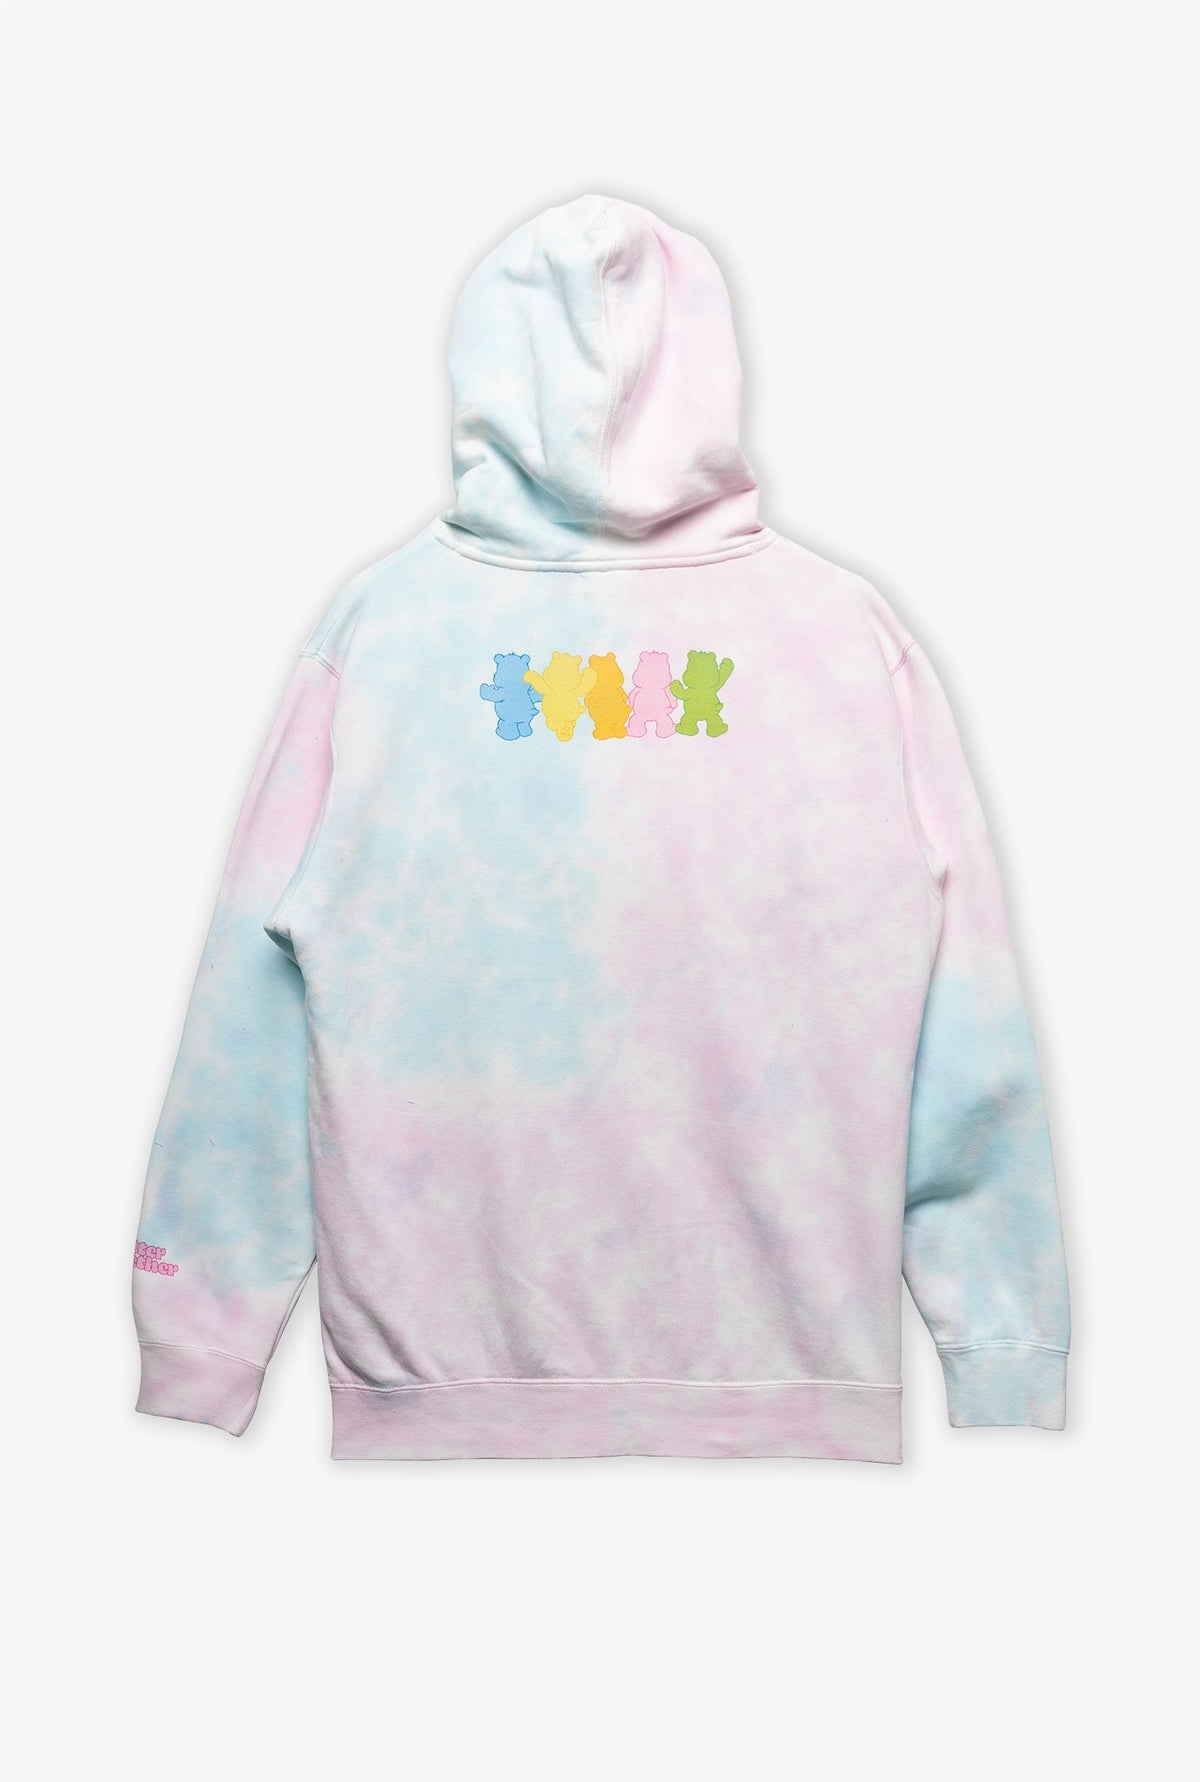 Better Together Tie Dye Hoodie - Cotton Candy